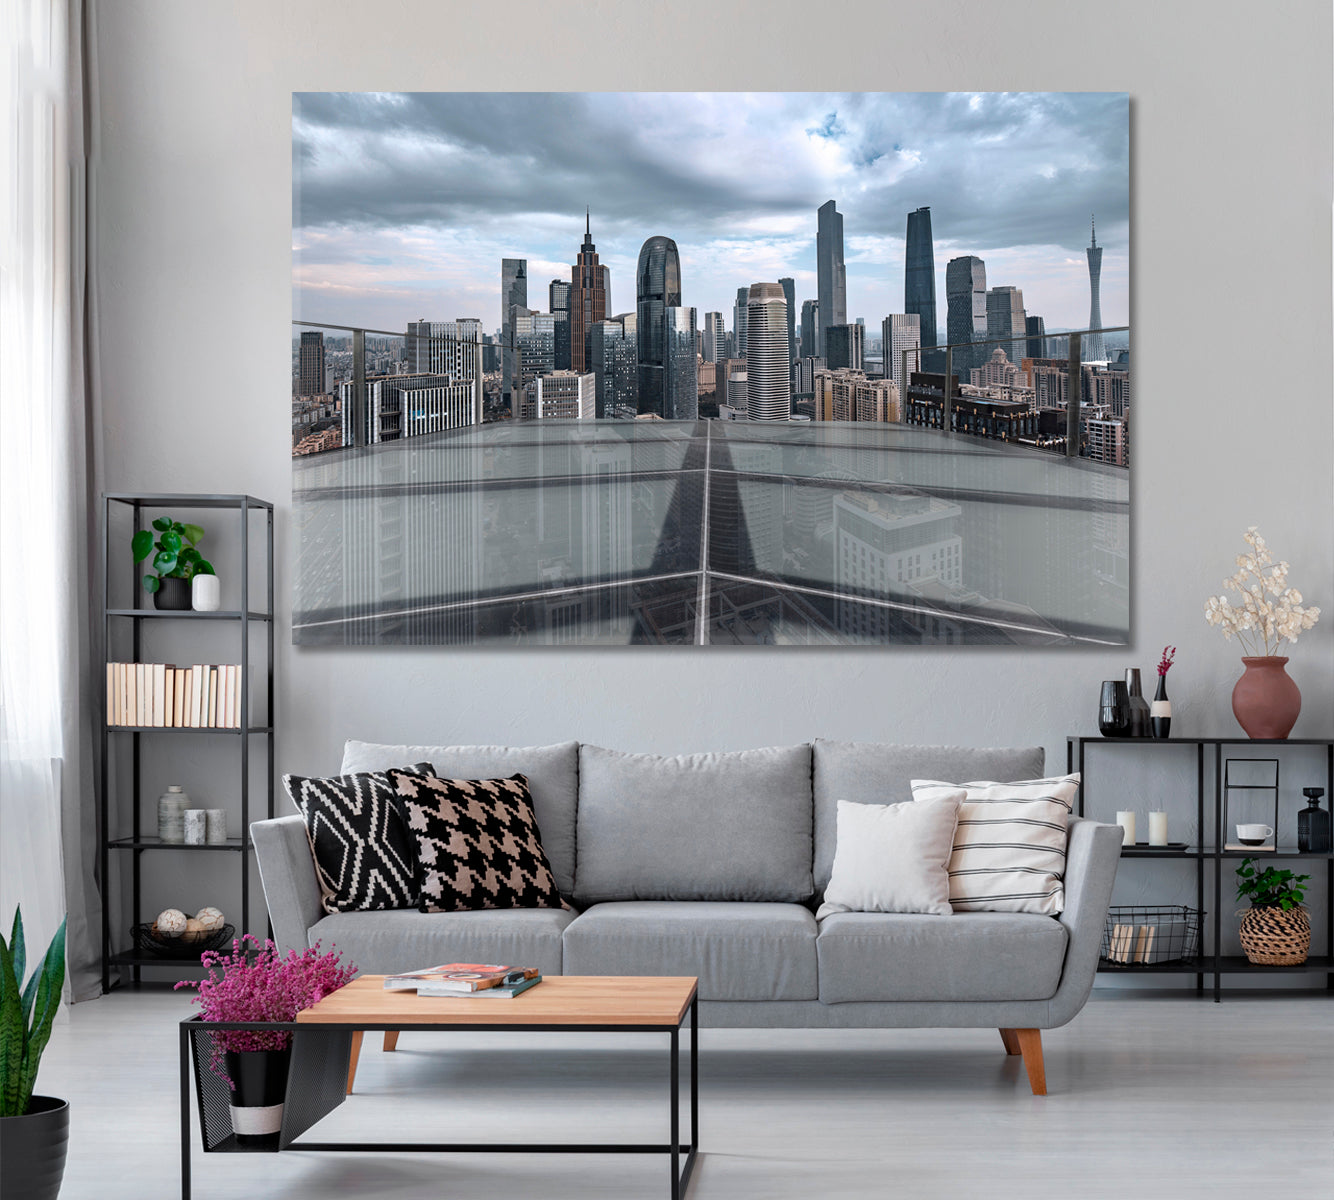 Guangzhou Skyscrapers Canvas Print ArtLexy 1 Panel 24"x16" inches 